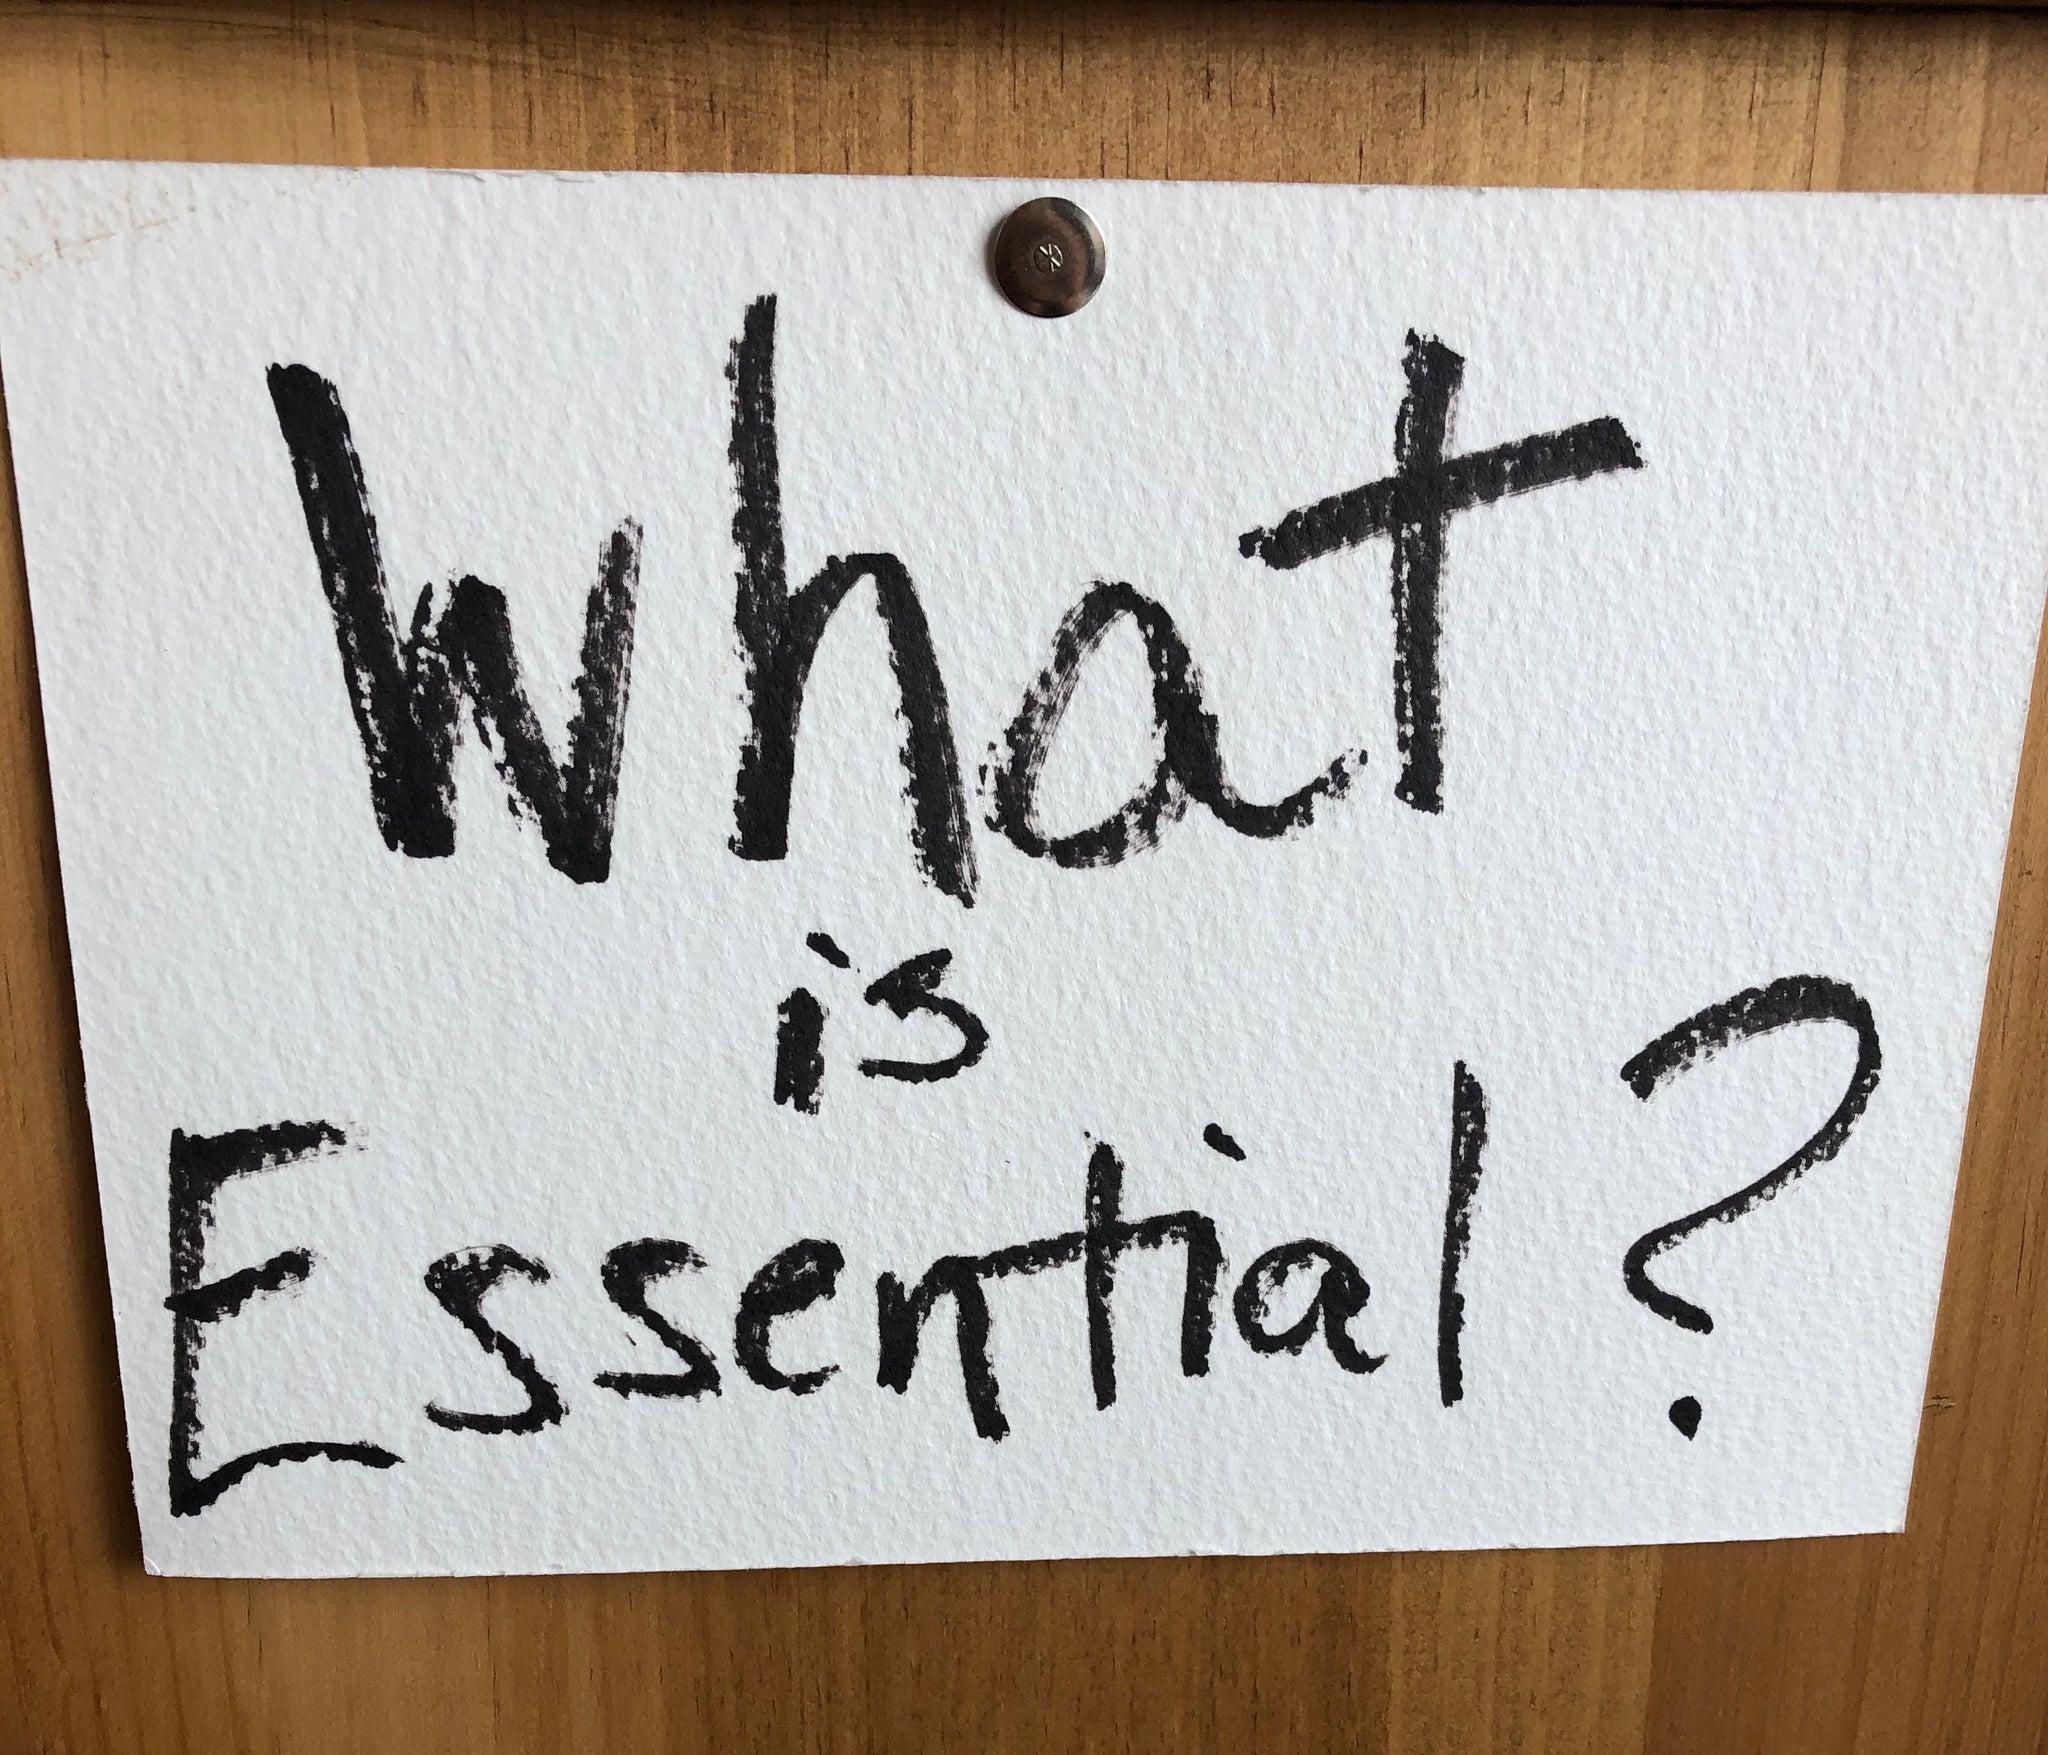 What is essential?